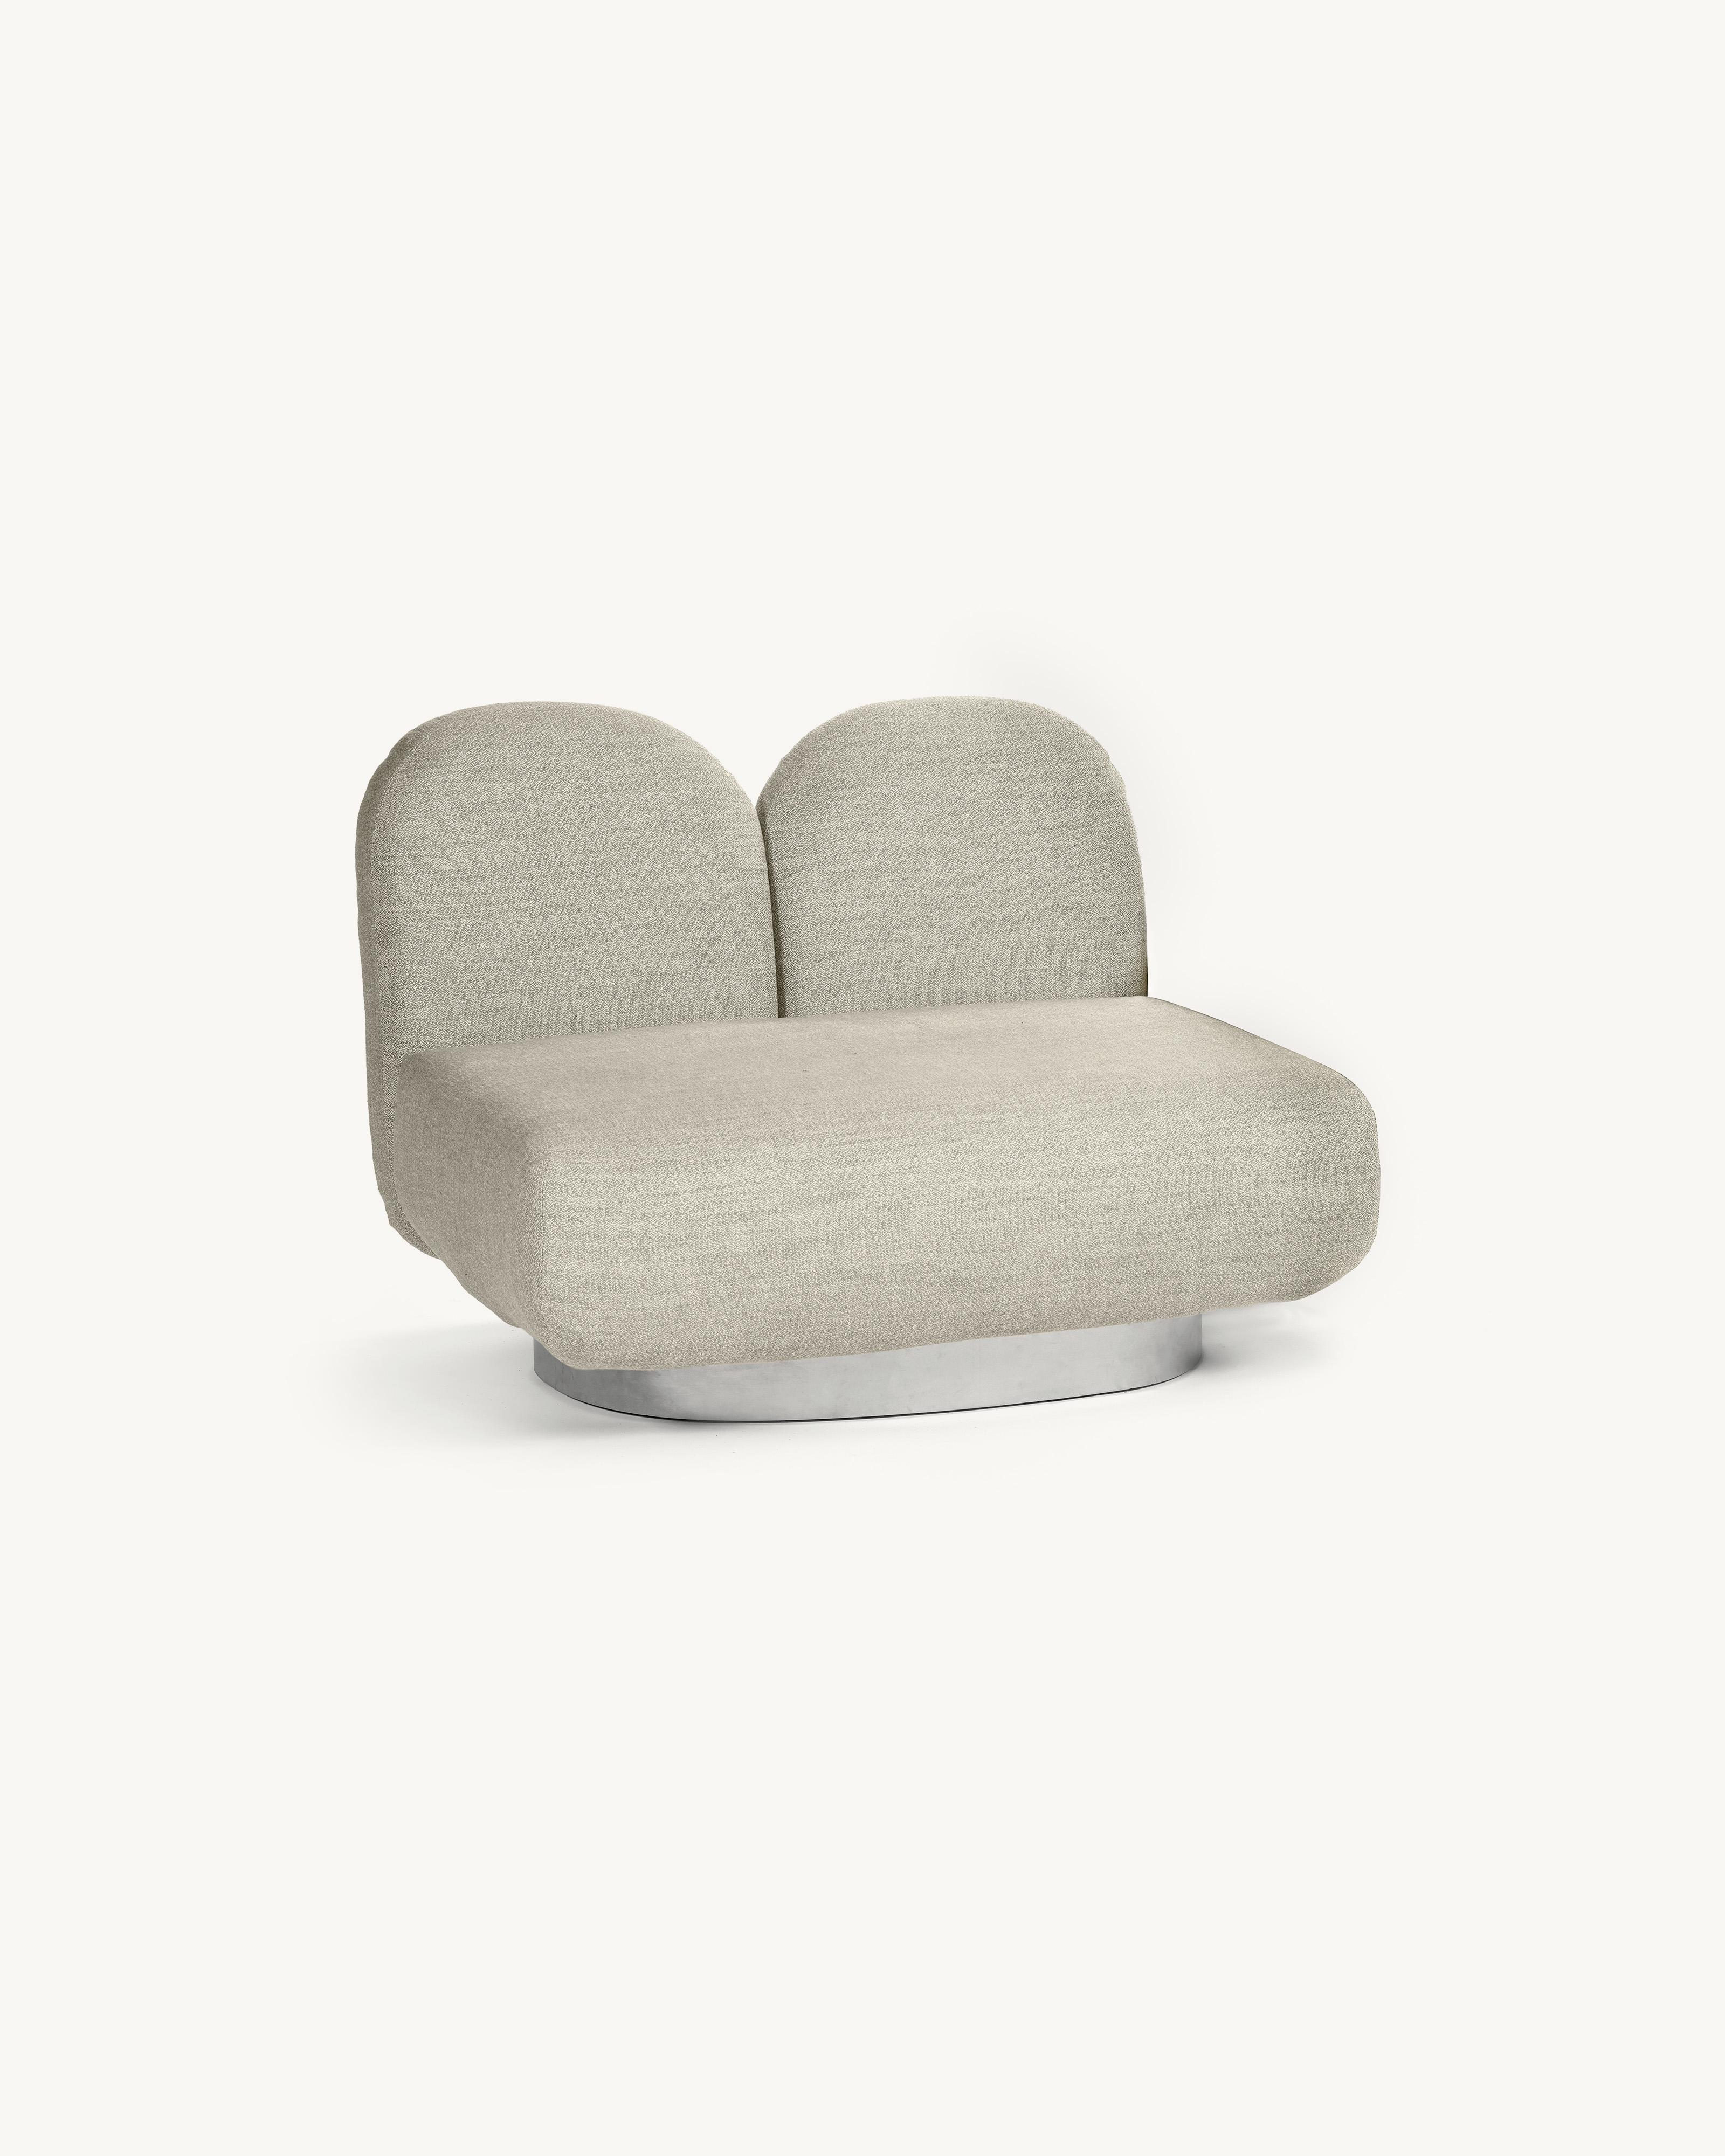 Contemporary Sofa 'Assemble' by Destroyers/Builders, 1 seater For Sale 7